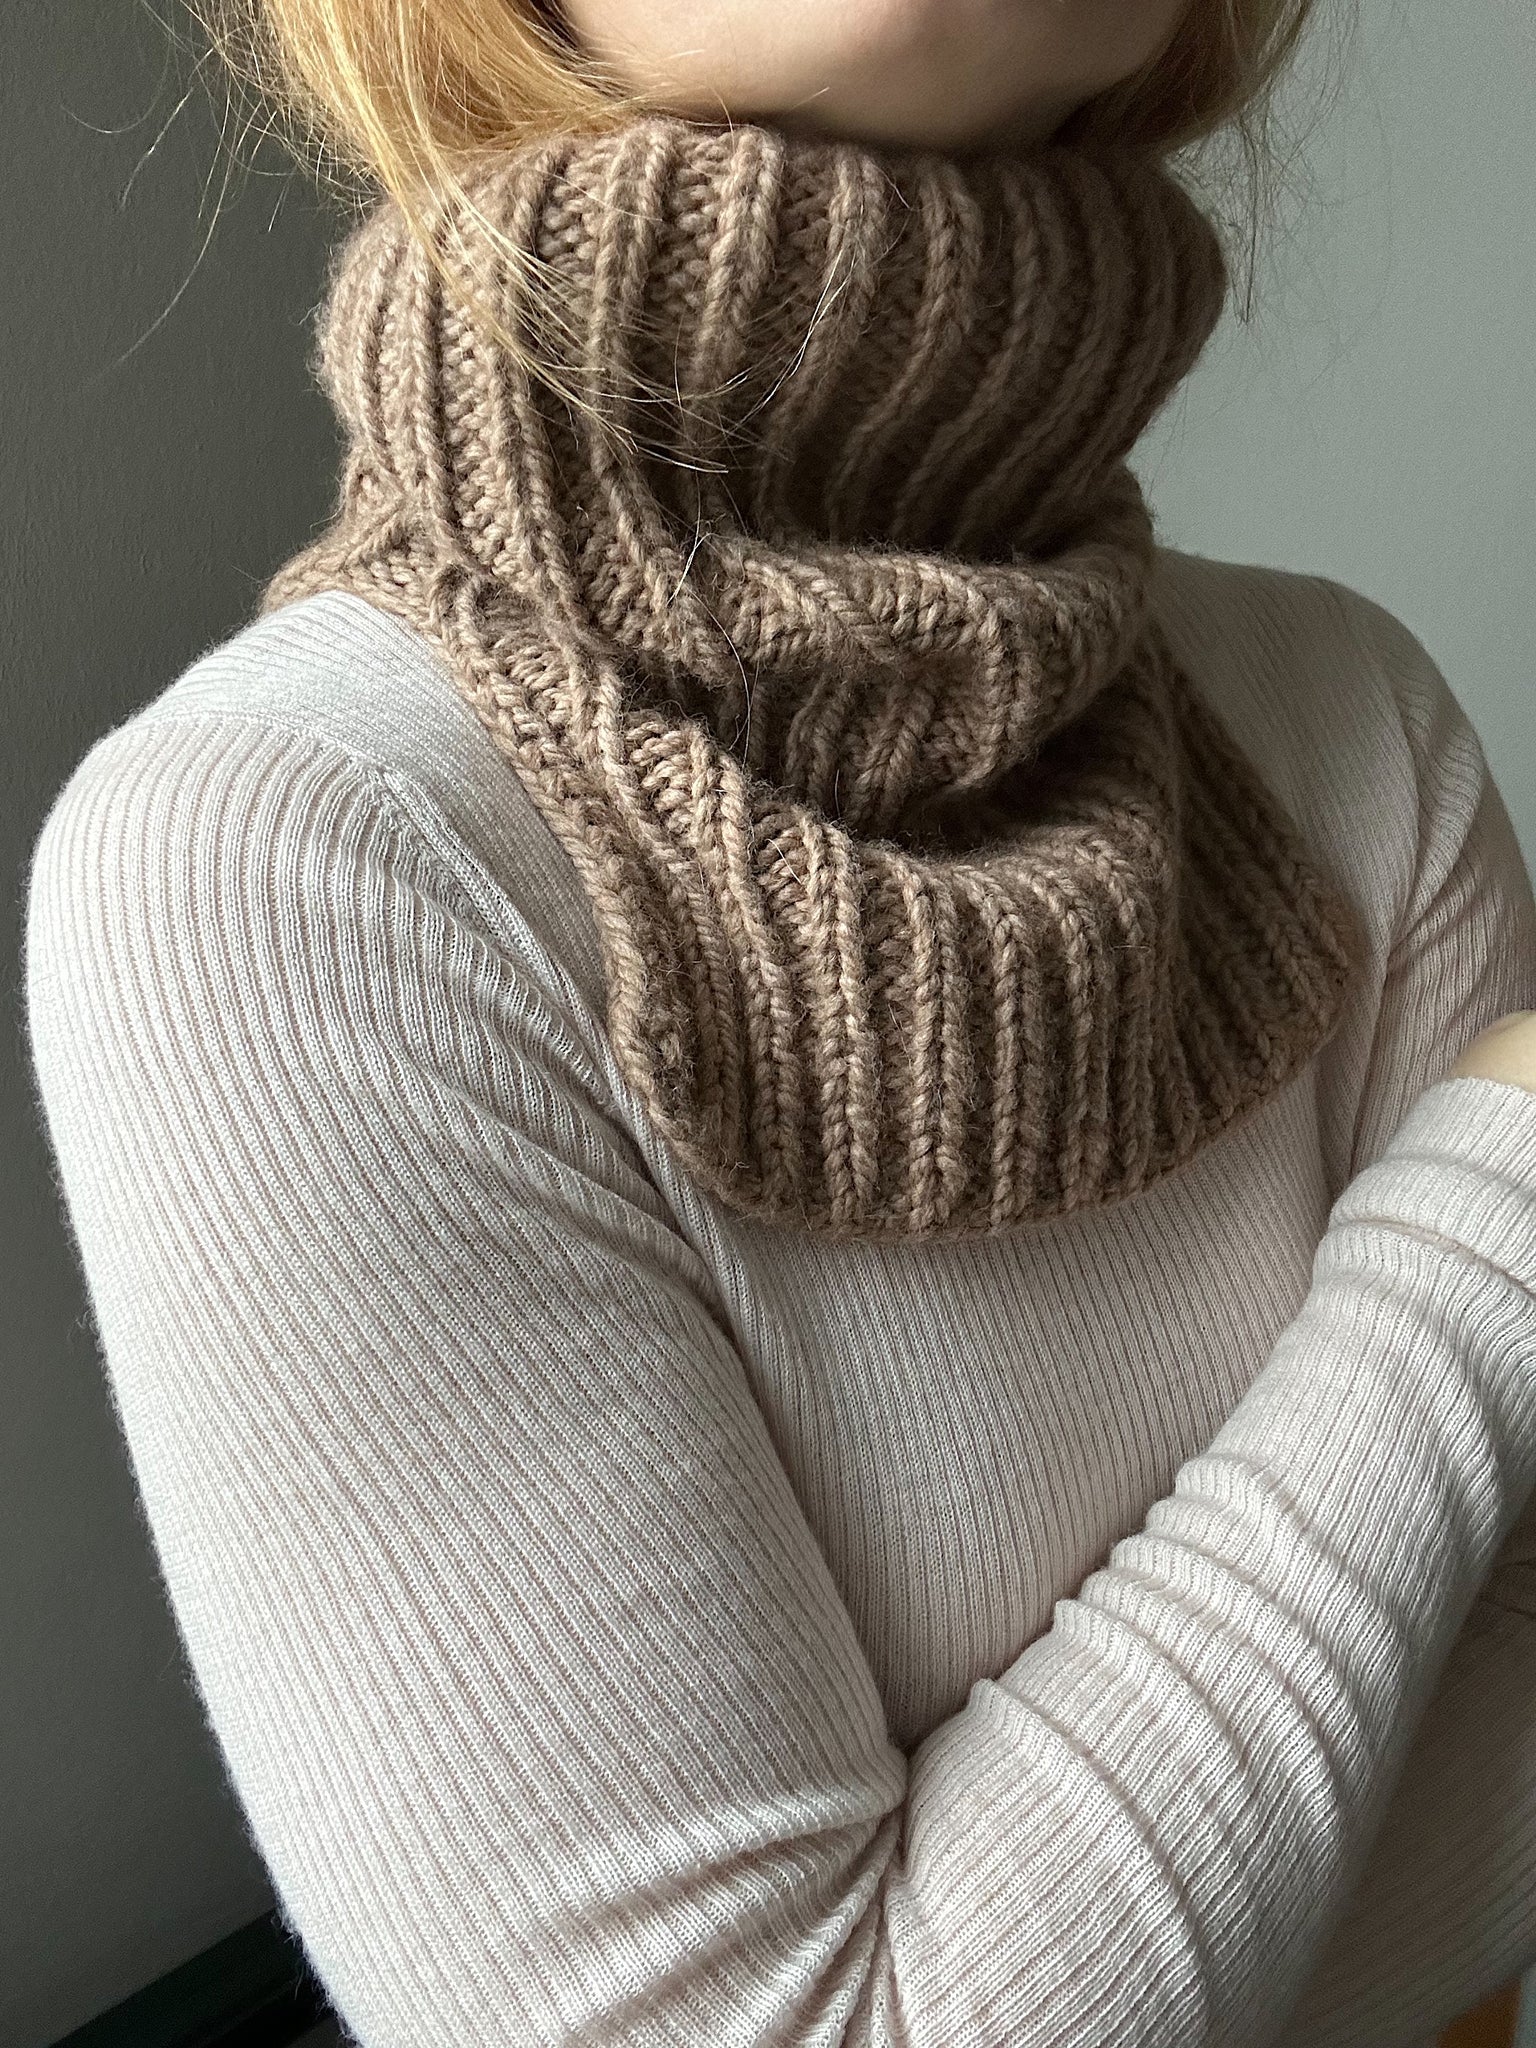 Nellie Neck Warmer - Knitting Pattern in English – • MY FAVOURITE